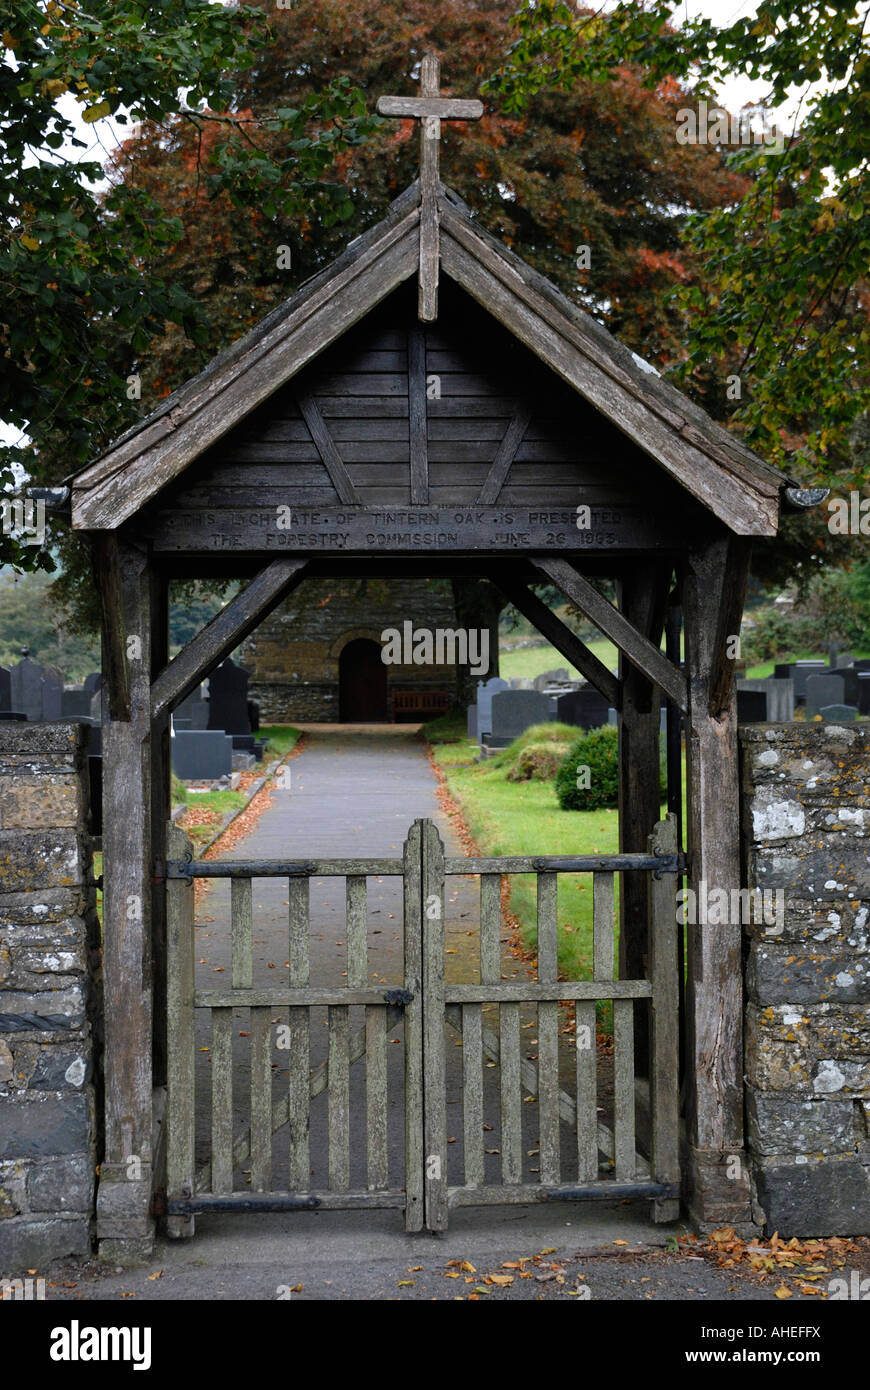 Lych gate at the entrance to Strata Florida chapel, Ceredigion, Wales. Stock Photo